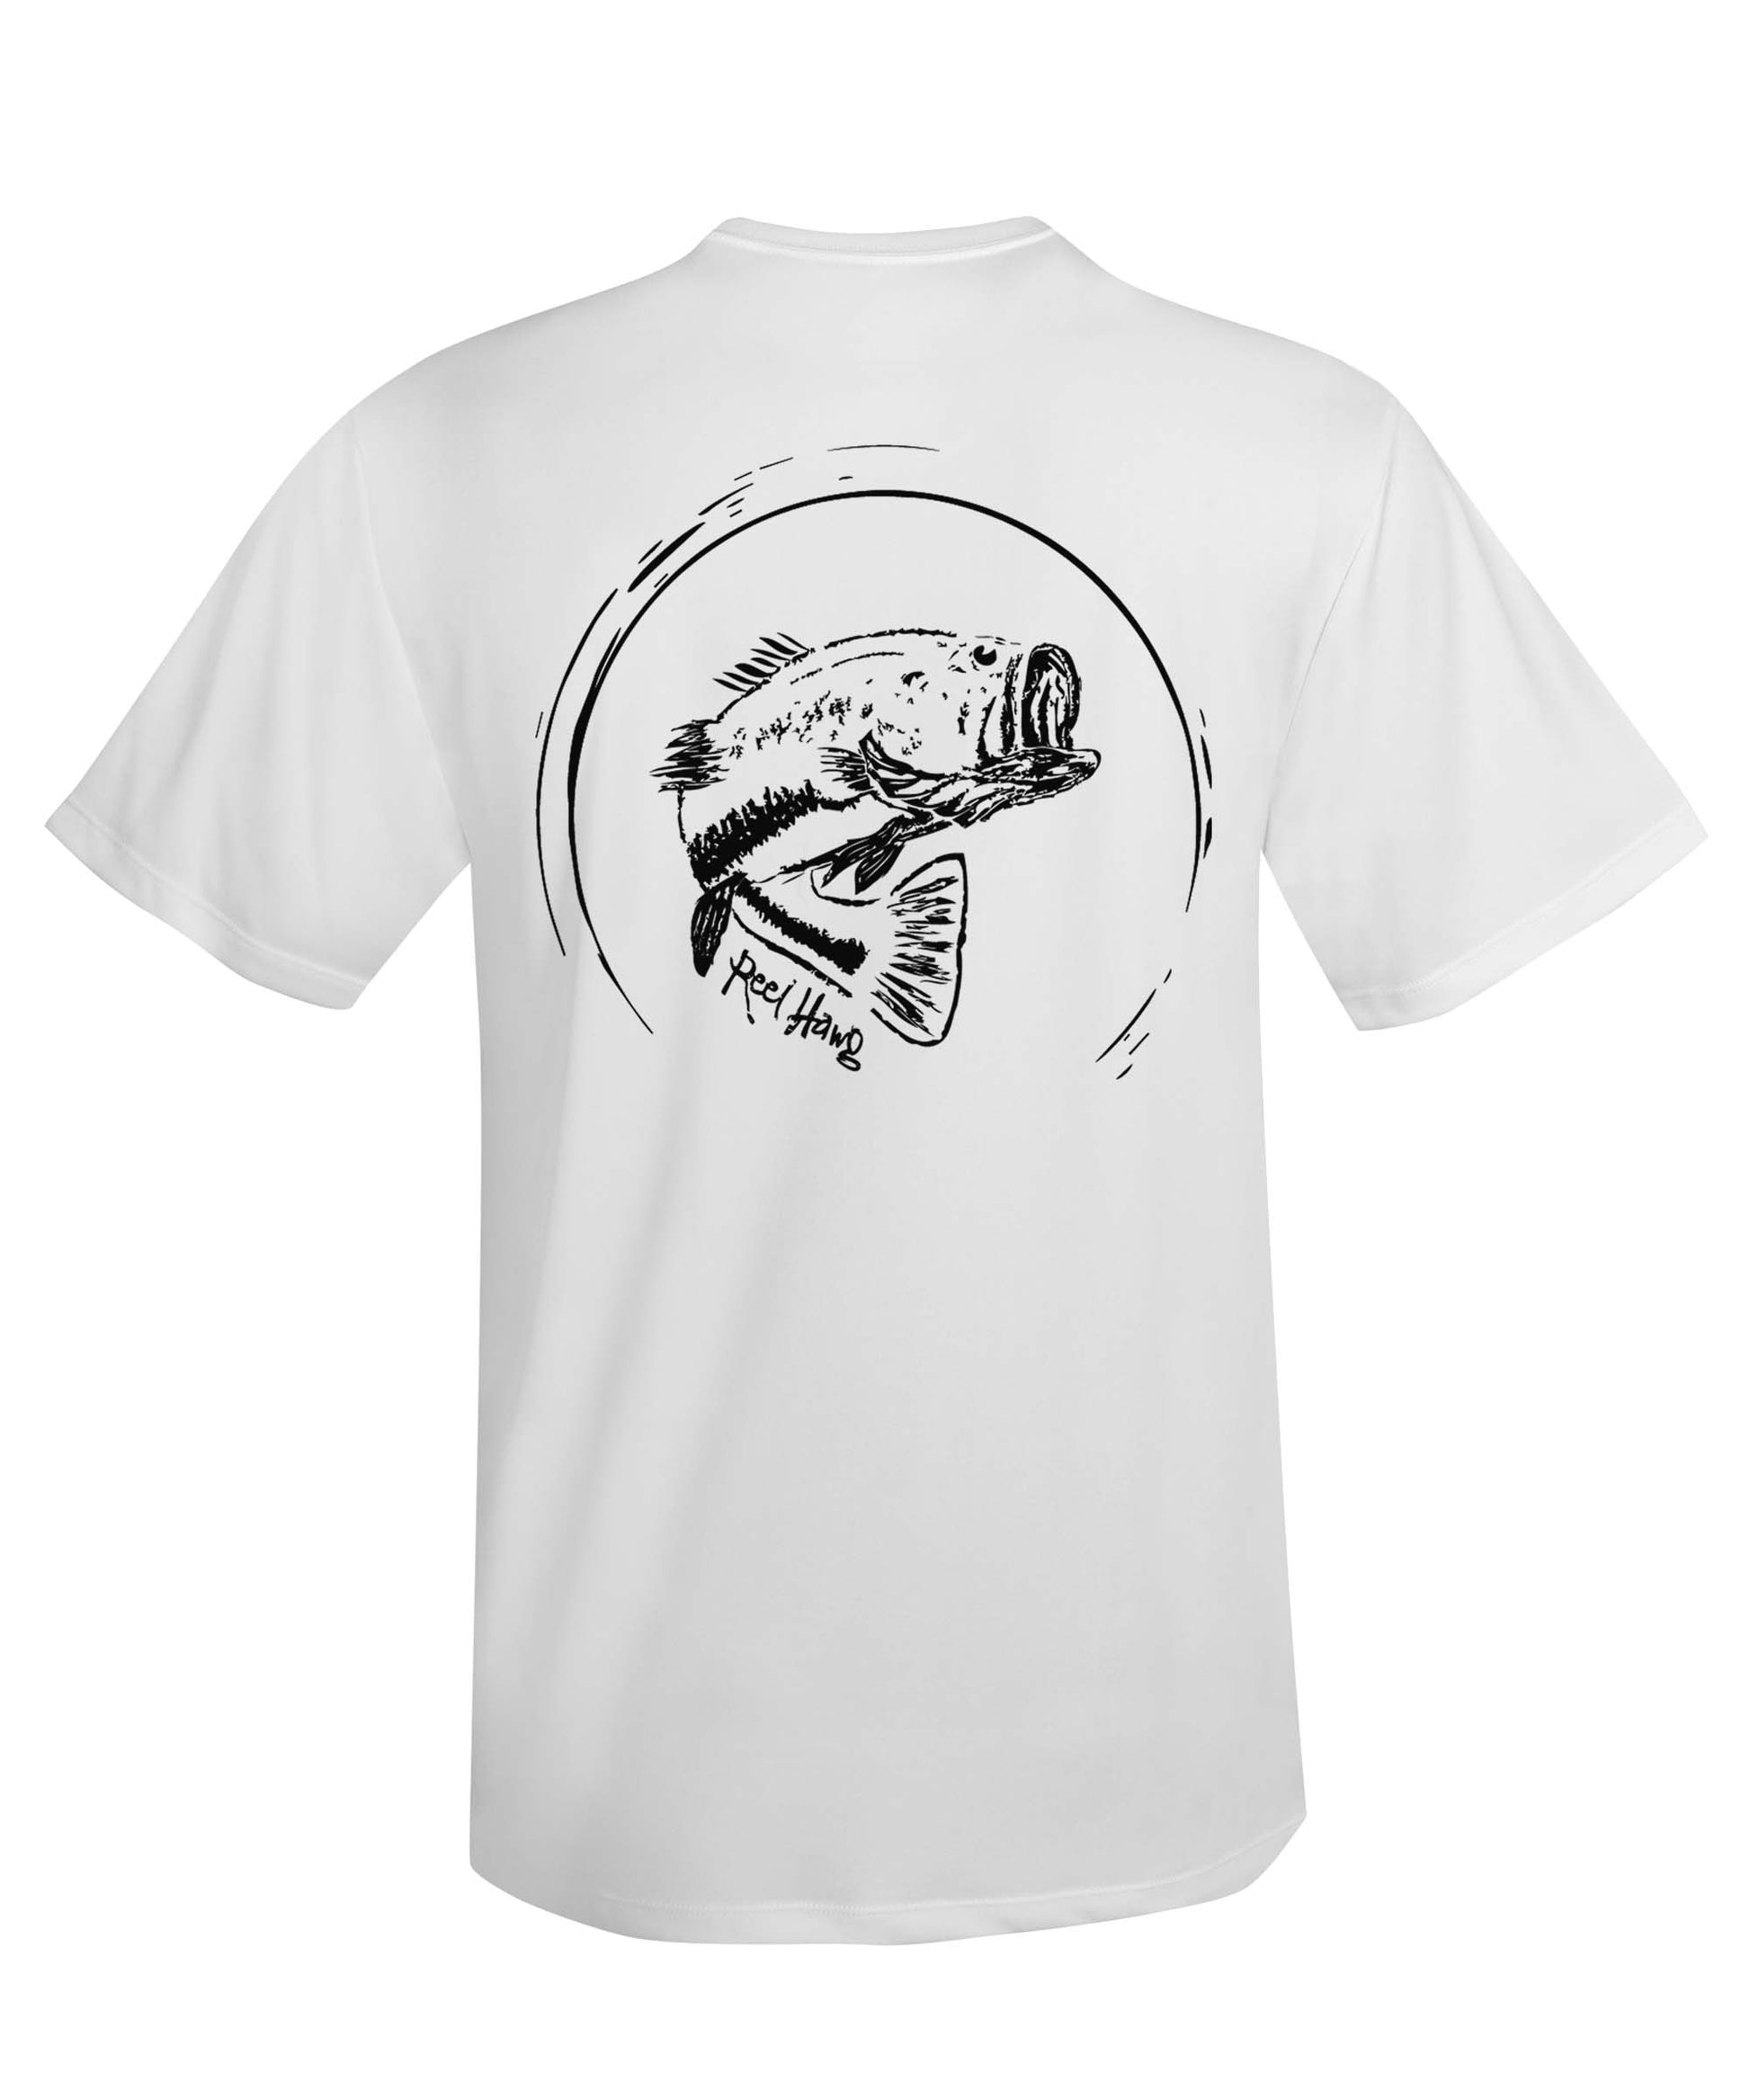 Bass Fishing Performance Dry-Fit 50+ UPF Sun Protection Shirts -Reel Fishy Apparel 2XL / White S/S - unisex